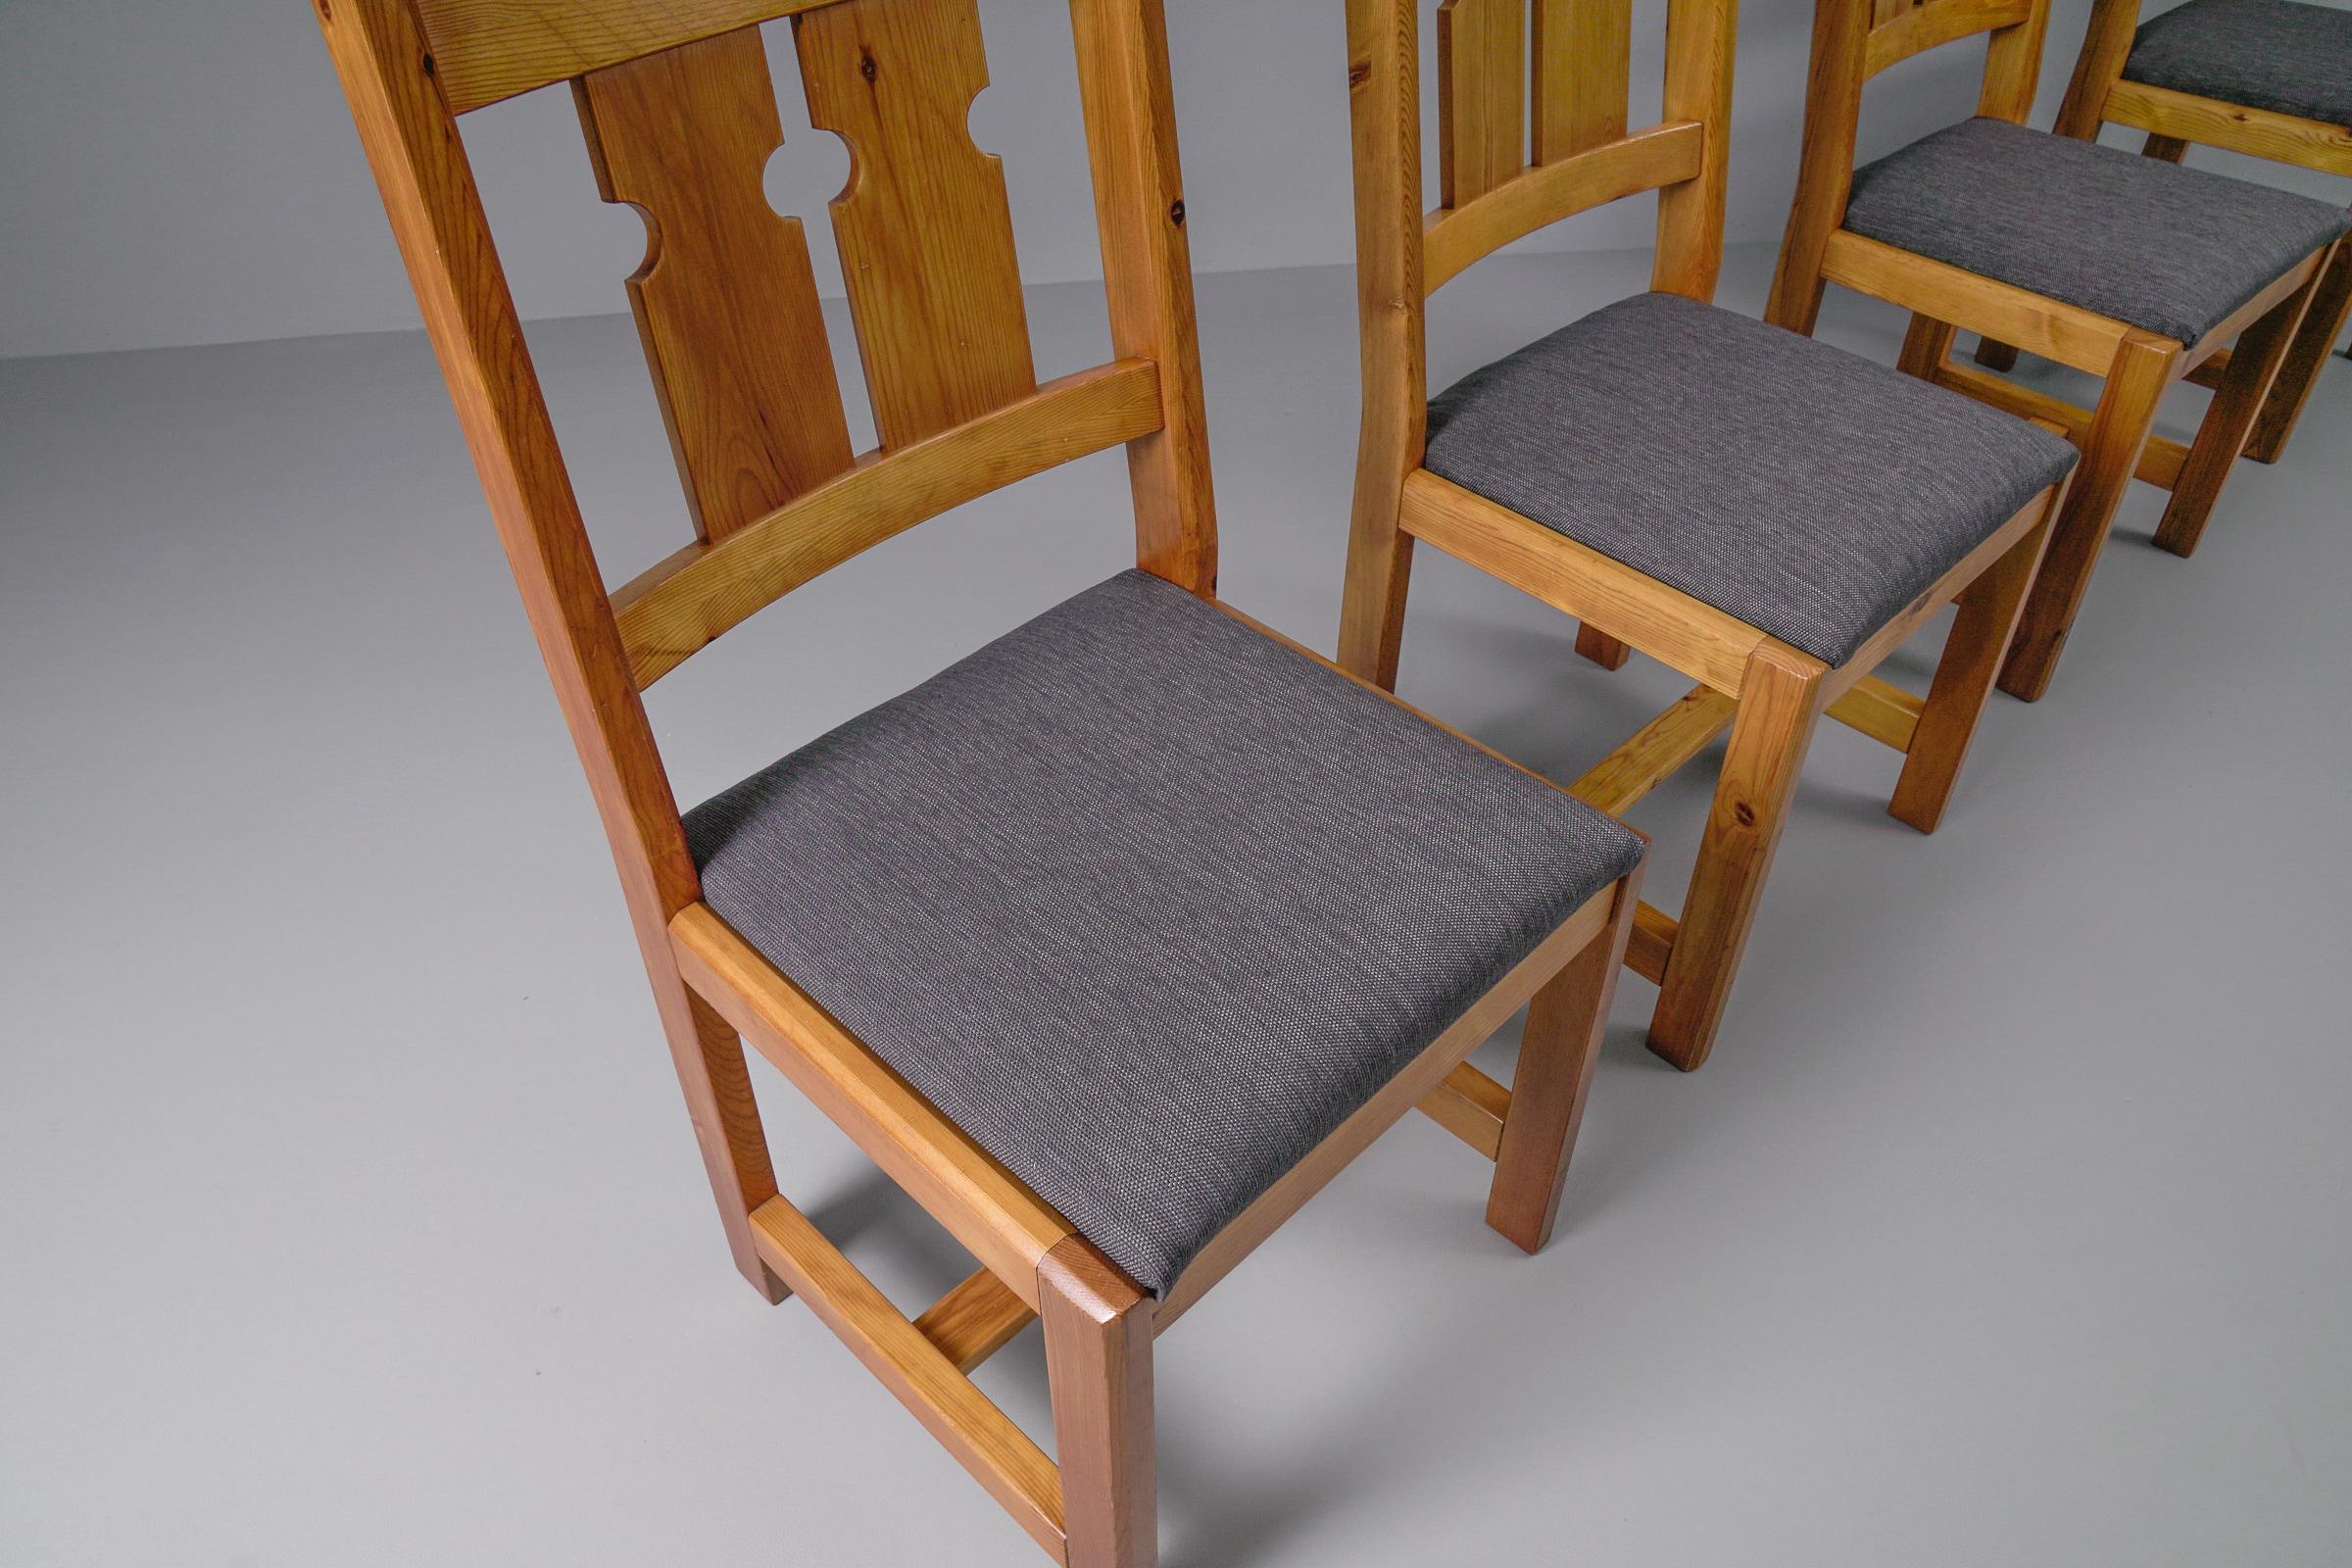 Fabric  Set of 4 Swedish Pine Chairs by Gilbert Marklund for Furusnickarn AB, 1970s For Sale